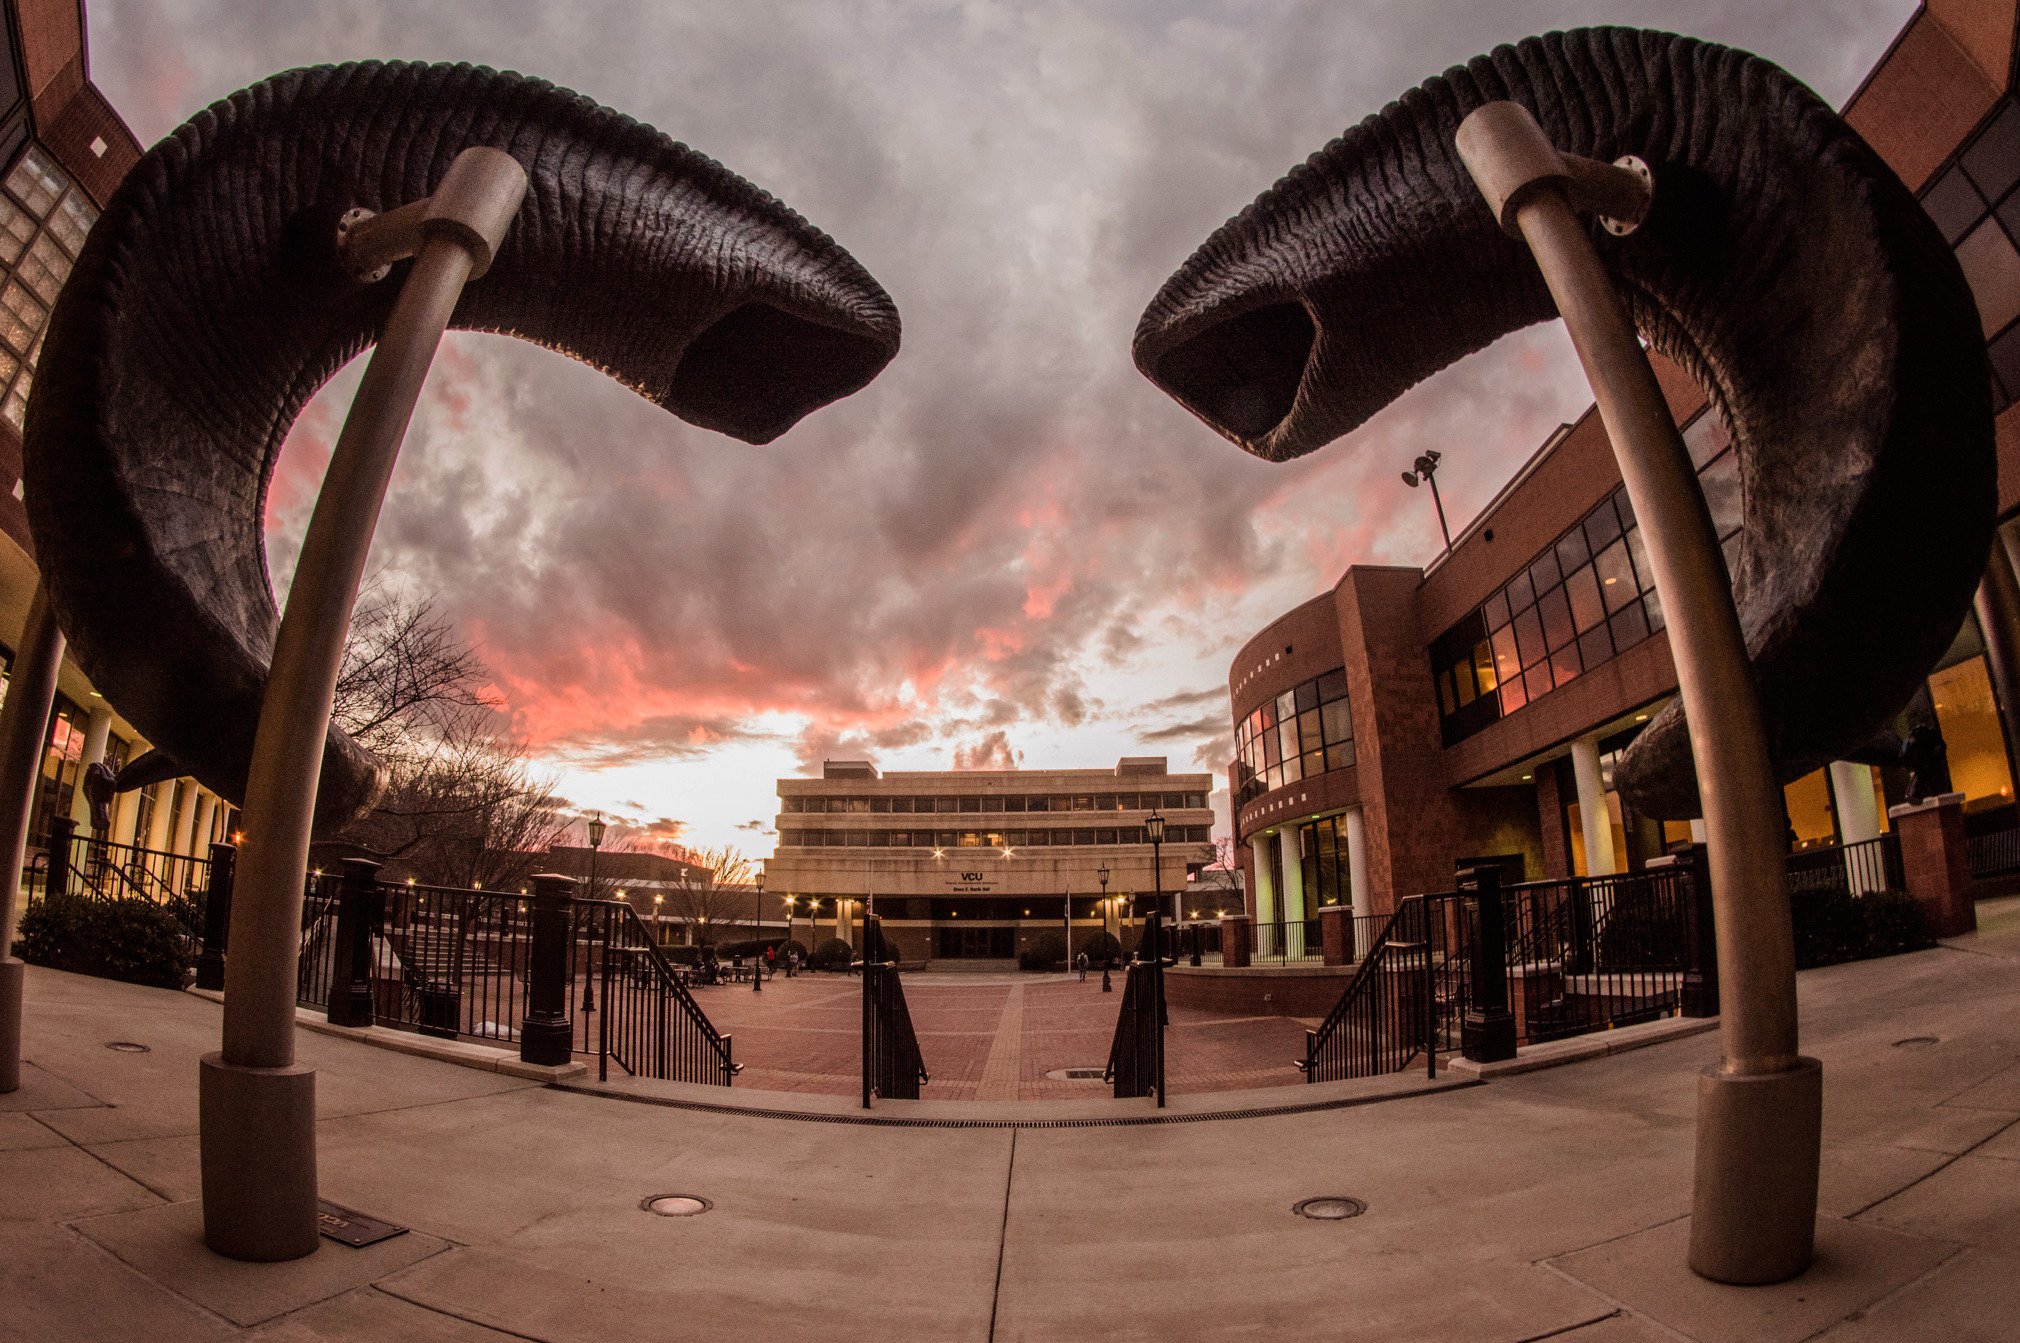 The Ram Horns Plaza at Sunset